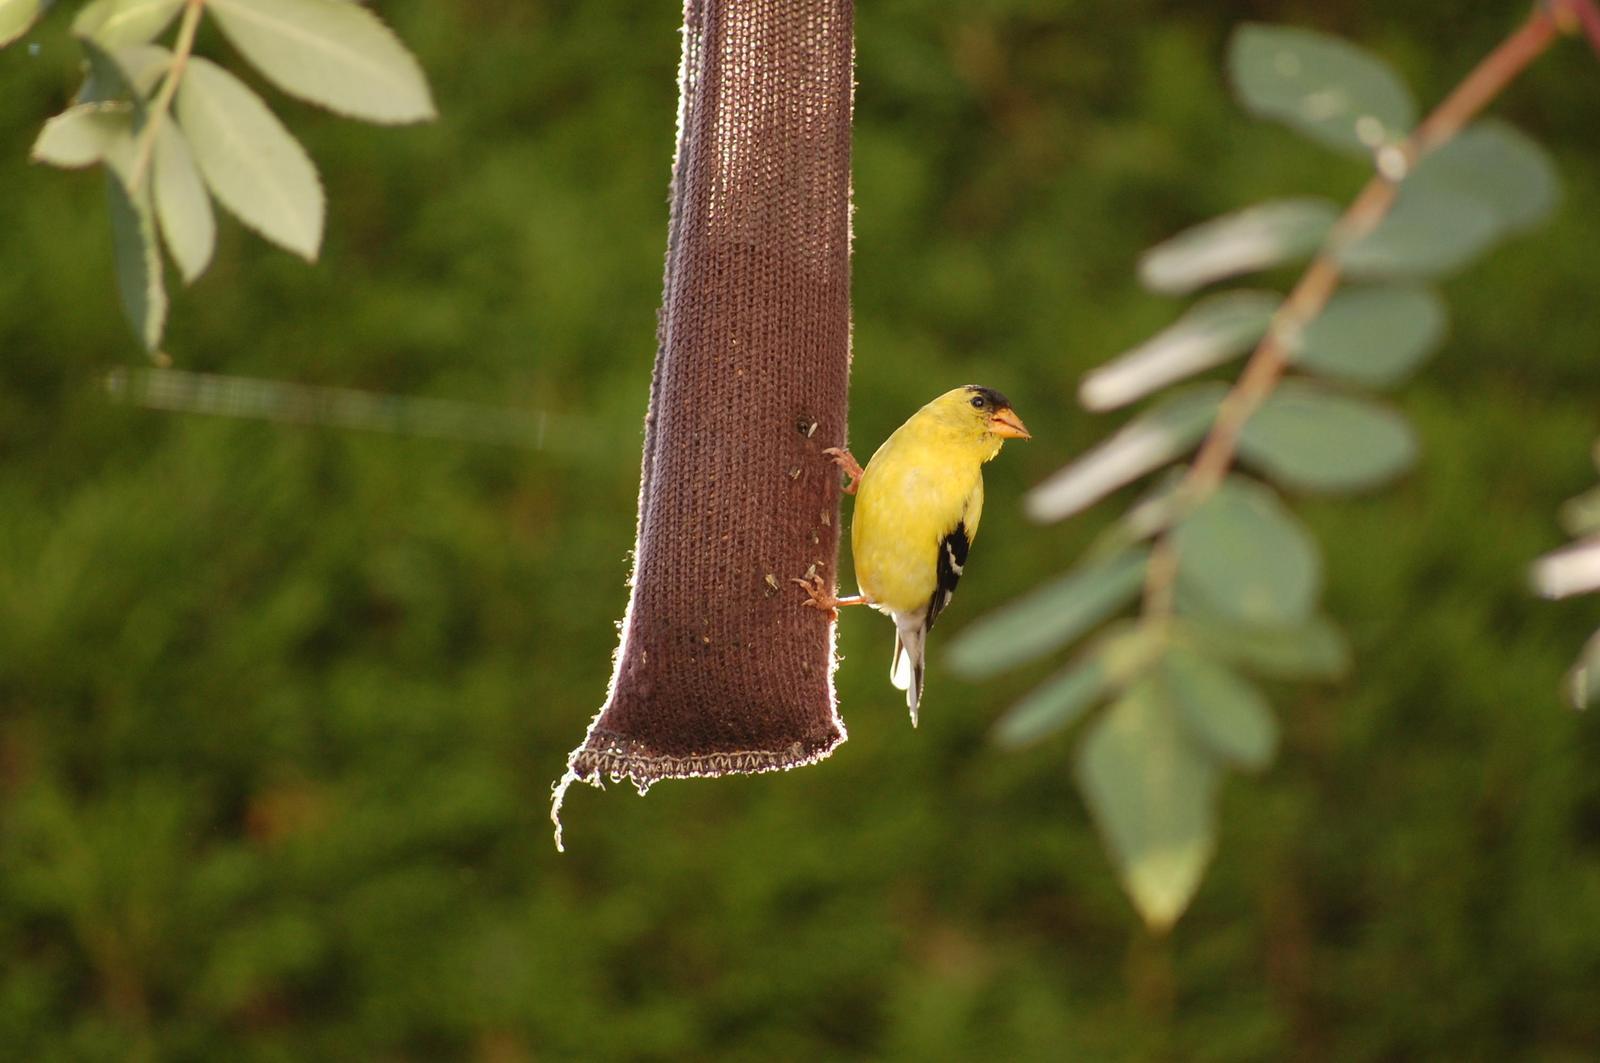 American Goldfinch Photo by Ted Goshulak